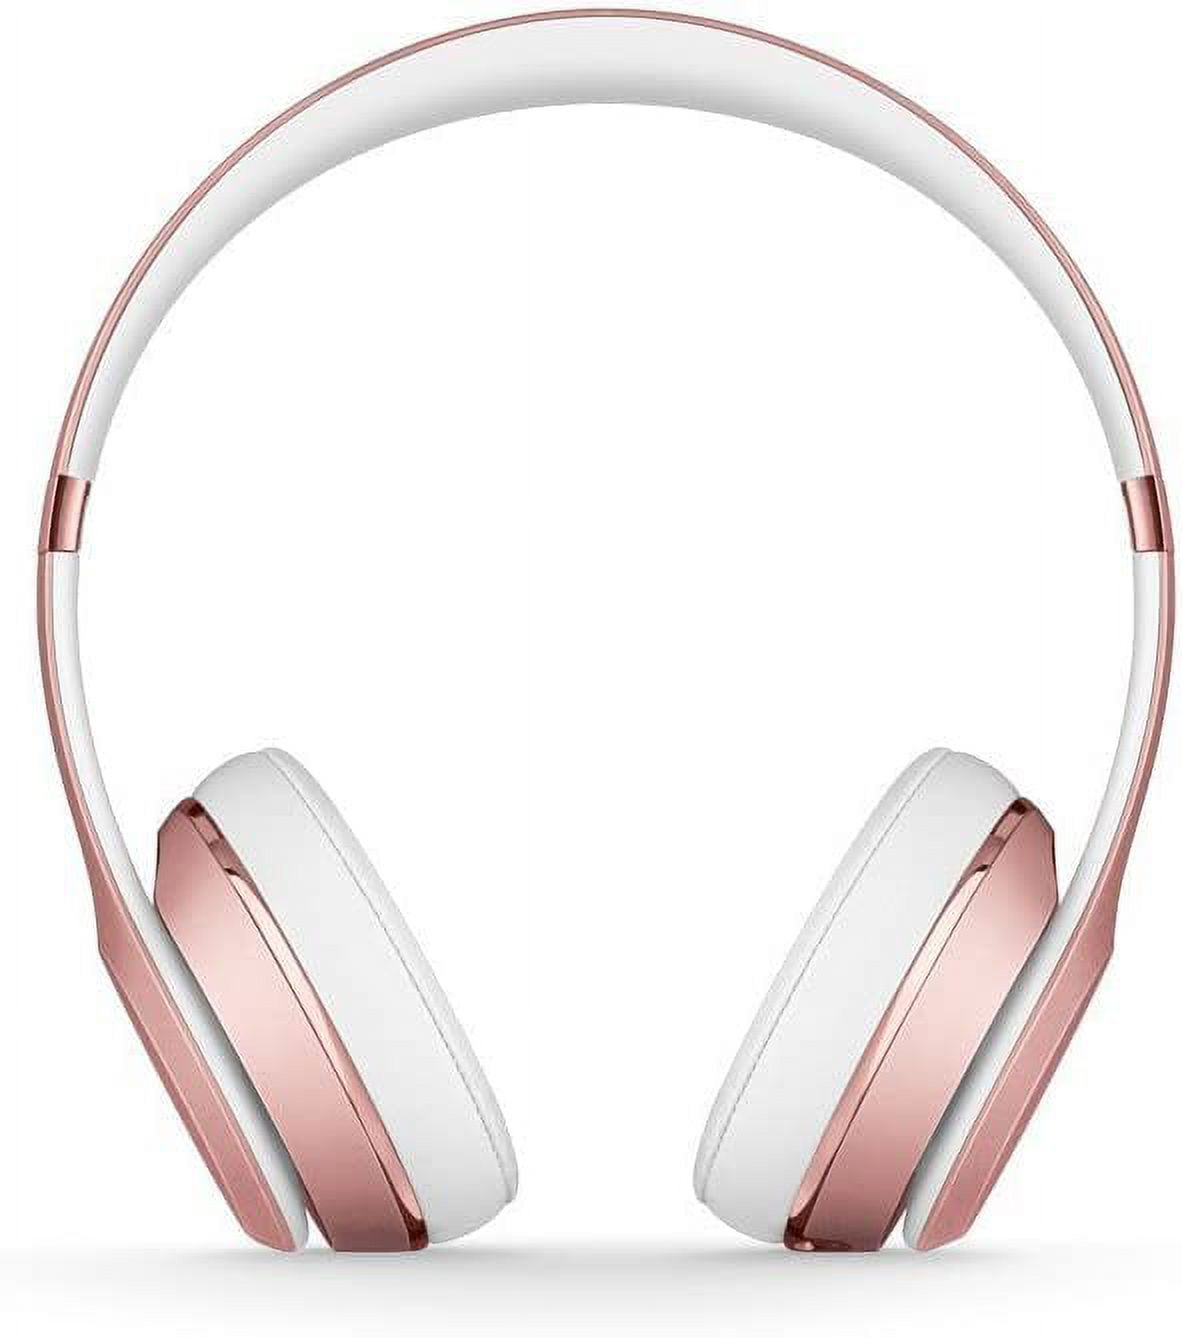 Restored Beats Solo 3 Wireless OnEar Headphones Rose Gold (Refurbished) - image 5 of 5